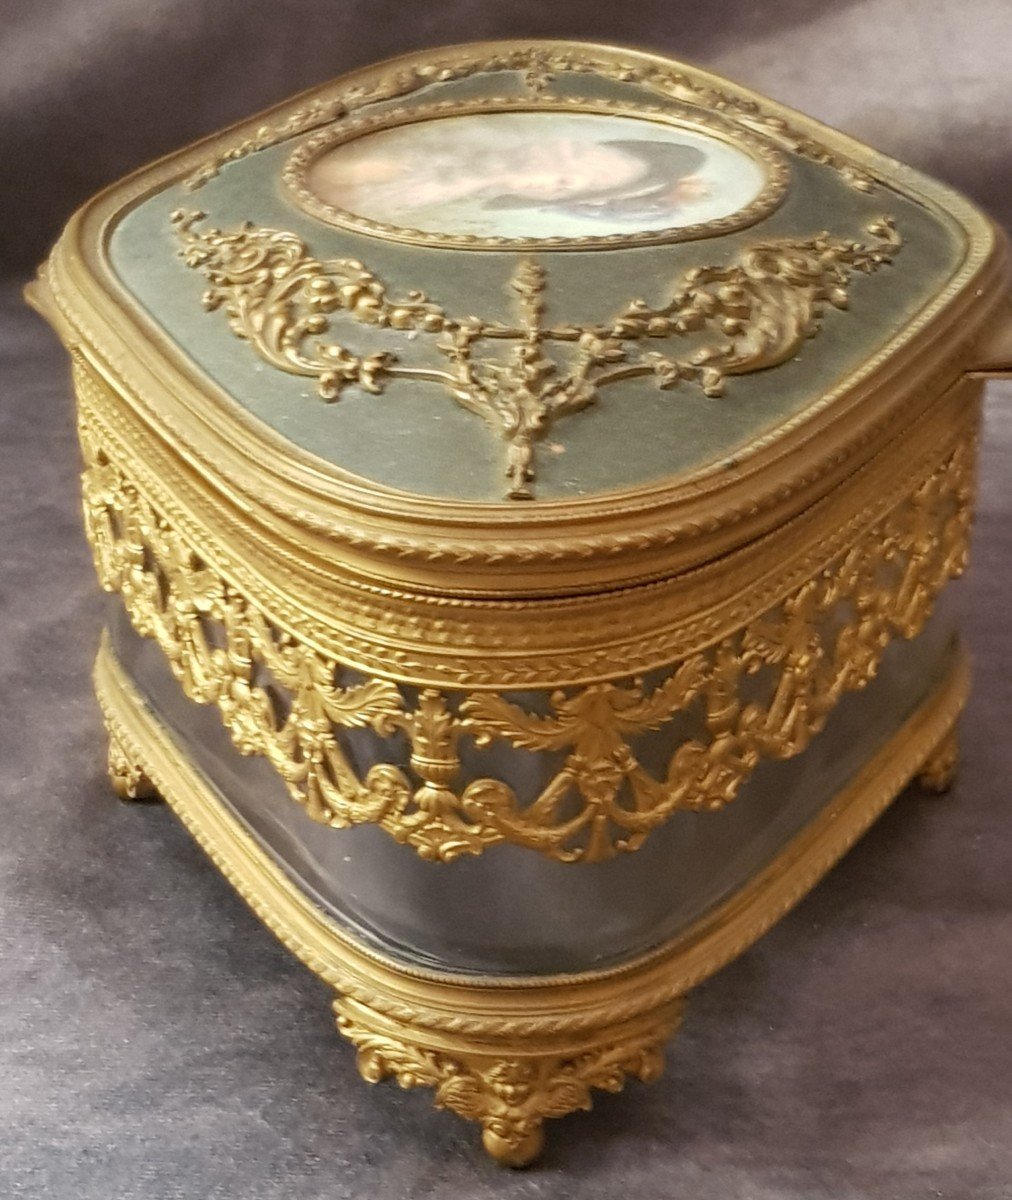 Old Glass And Brass Jewelry Box With Miniature-photo-1